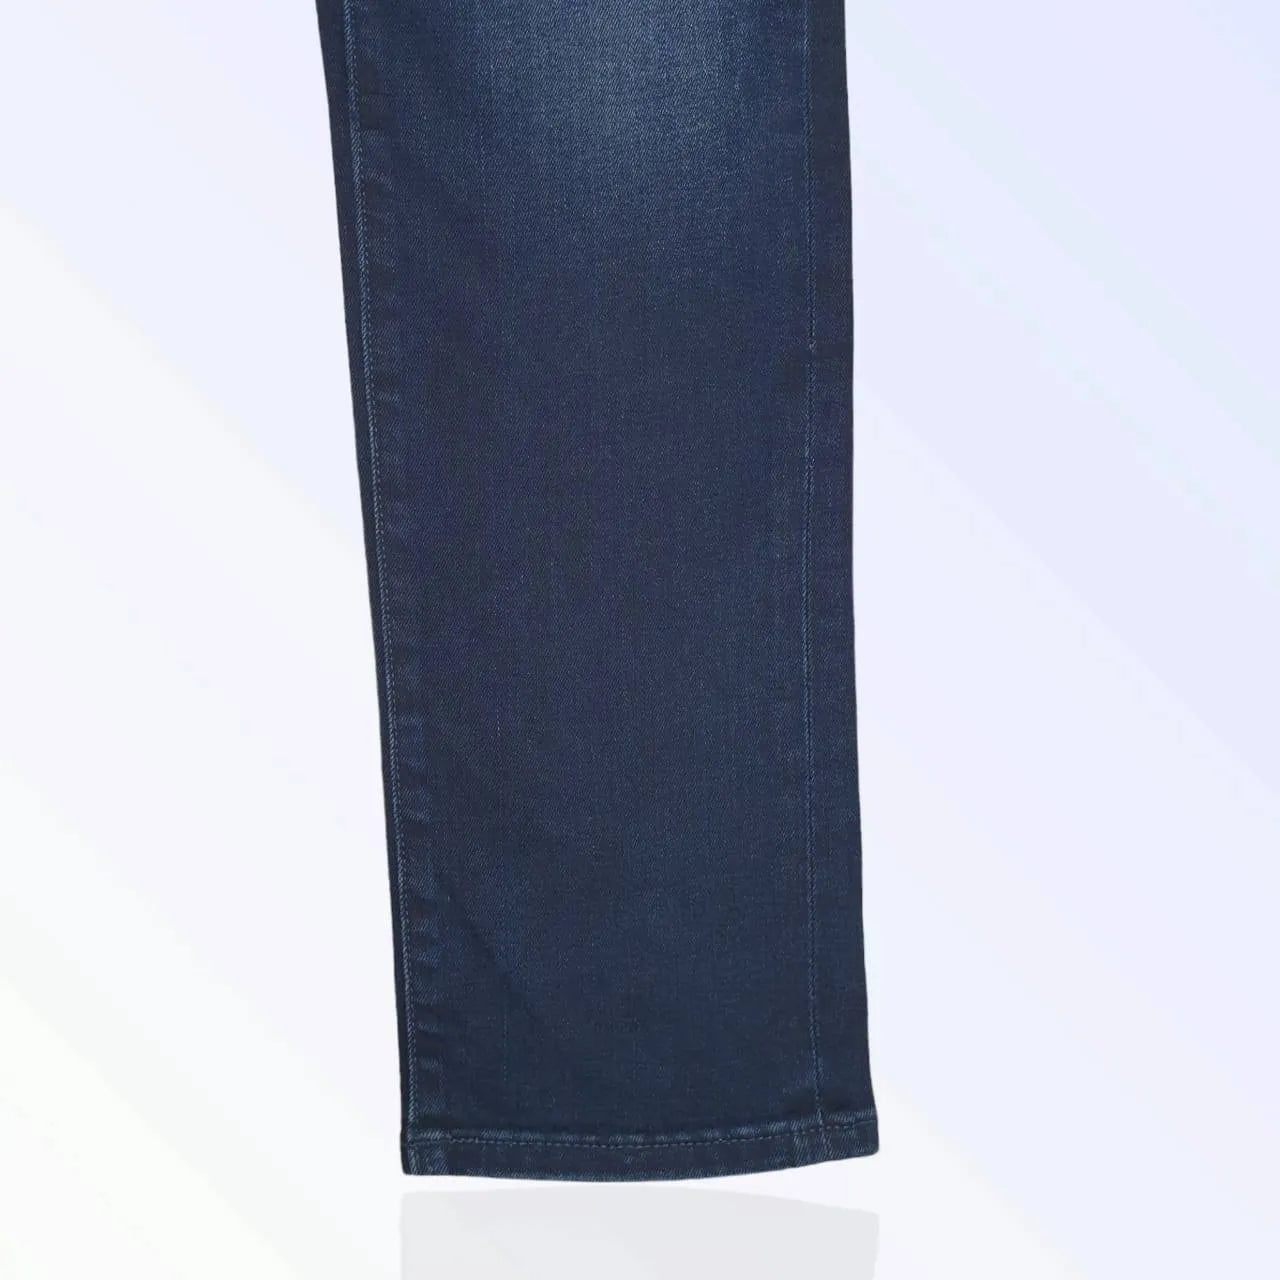 Jack&Jones Deep Blue Jeans: Slim/Glenn fit for a sharp & comfortable look (mention size if relevant). Designed to hug your legs comfortably for a defined silhouette.Jack&Jones, Slim/Glenn fit, comfortable, stylish, versatile, everyday essentials.